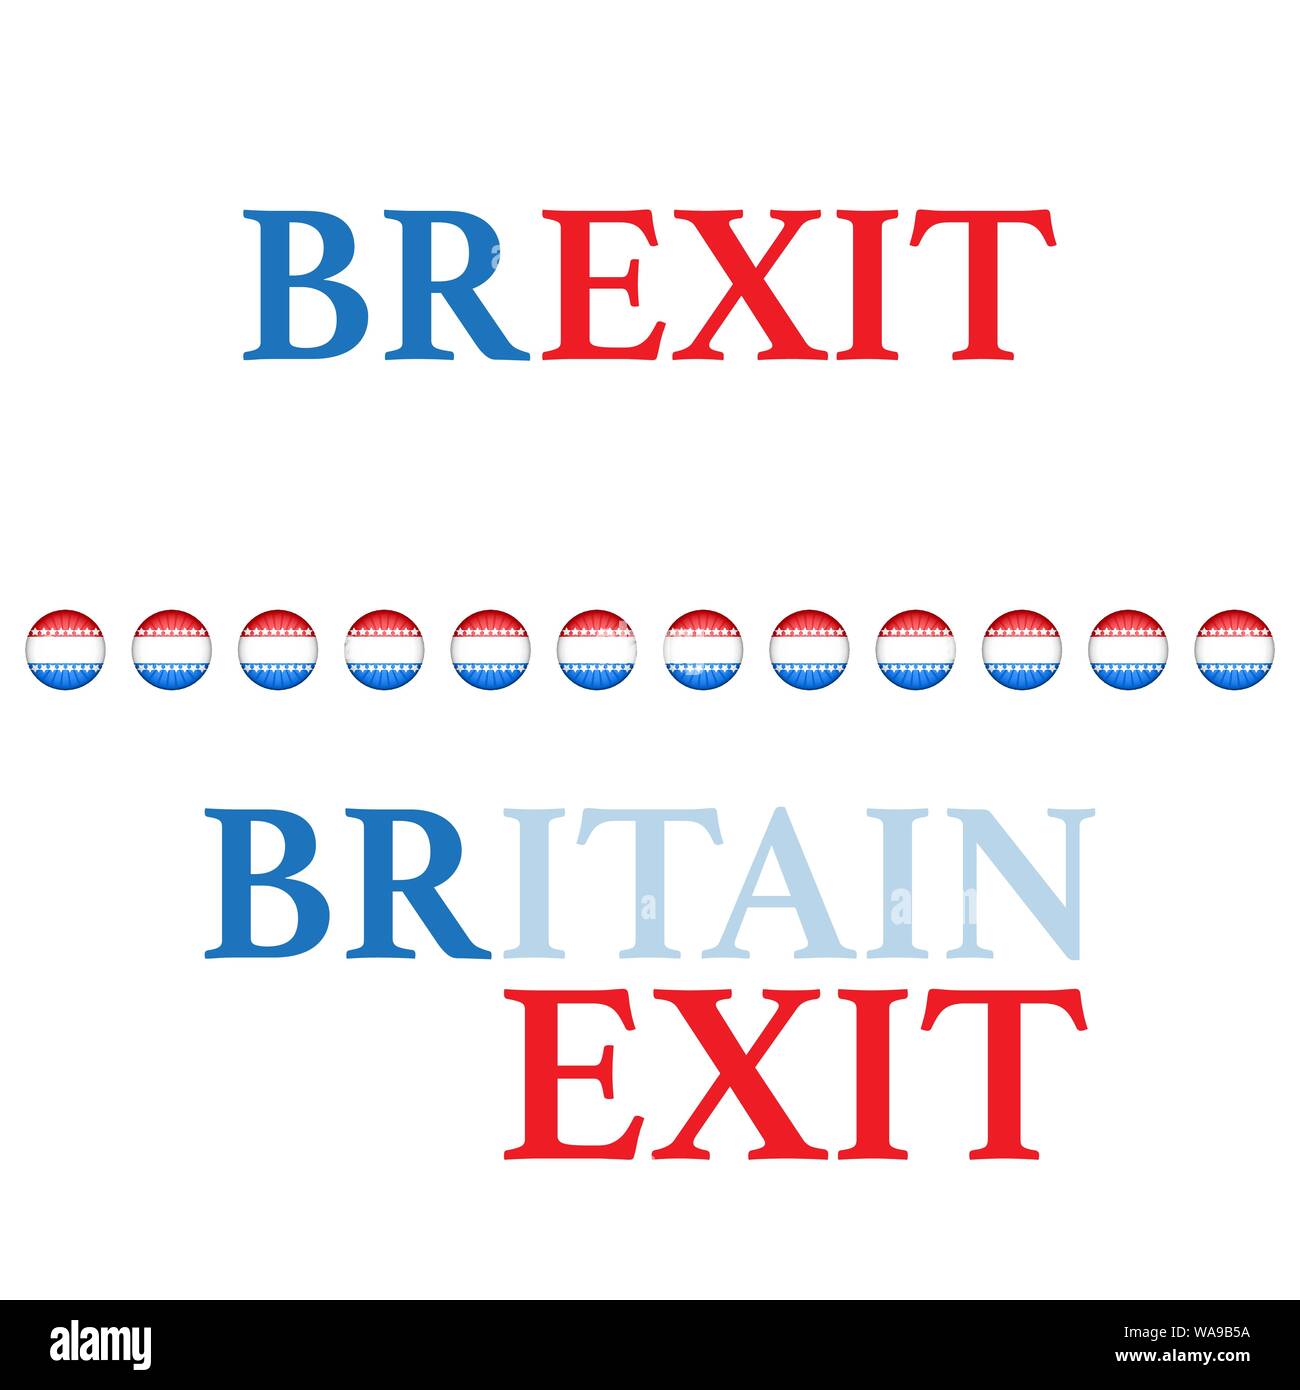 Red and blue textt Brexit isolated on white background Stock Vector